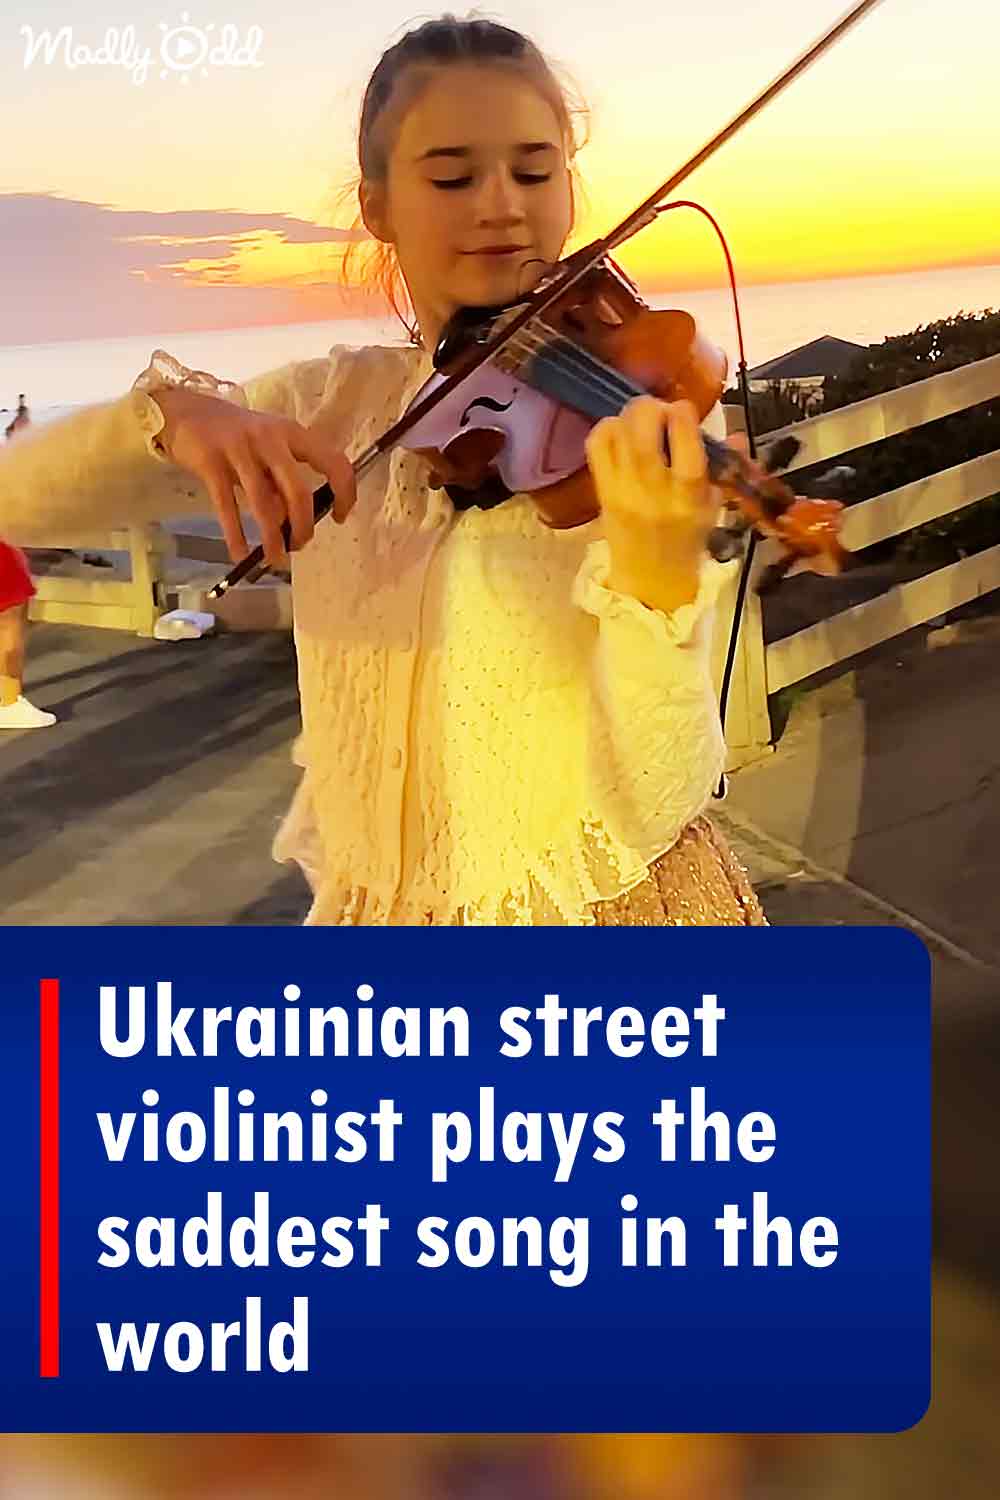 Ukrainian street violinist plays the saddest song in the world